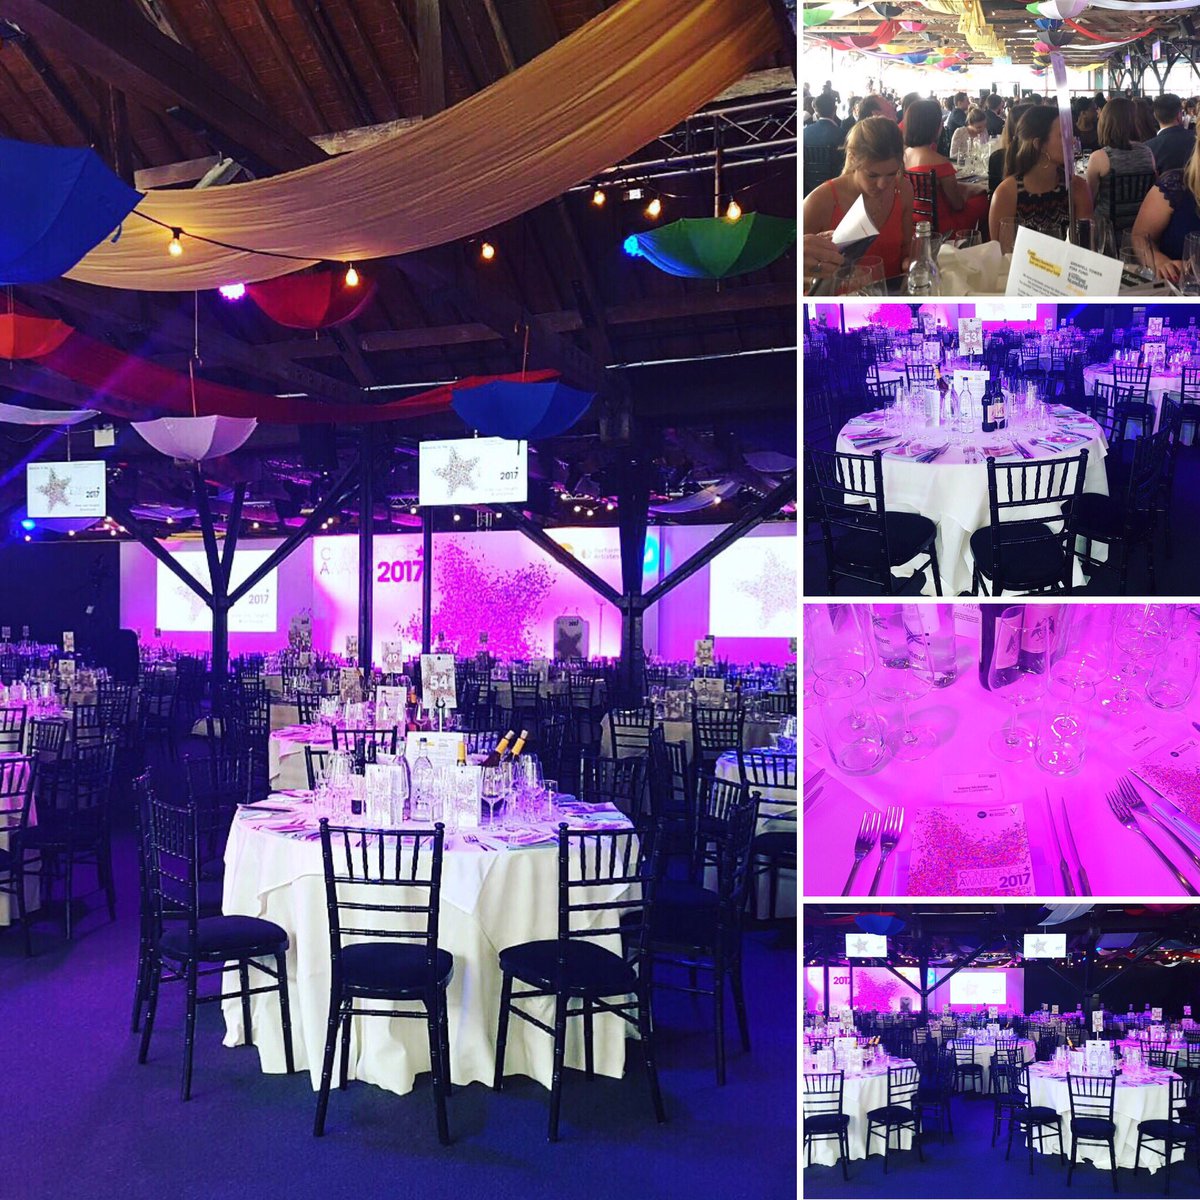 We've got that #fridayfeeling as we take our seats at this years #ConferenceAwards at the amazing @TobaccoDockLon 🥂📸🏅 #eventprofs (@TheBDC)